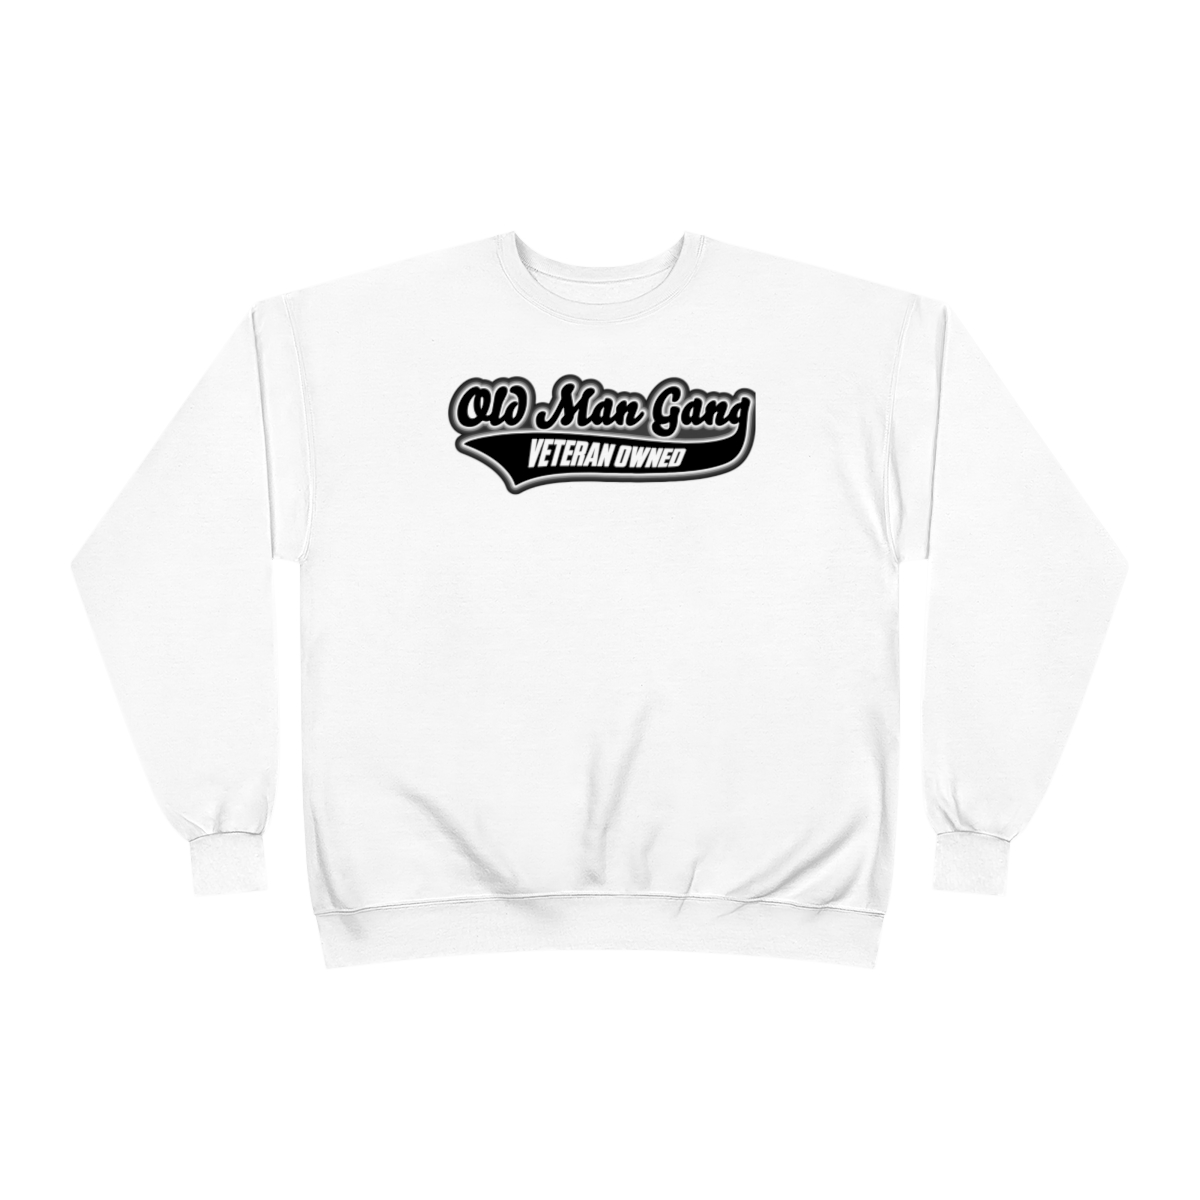 A white sweatshirt with an old school logo.